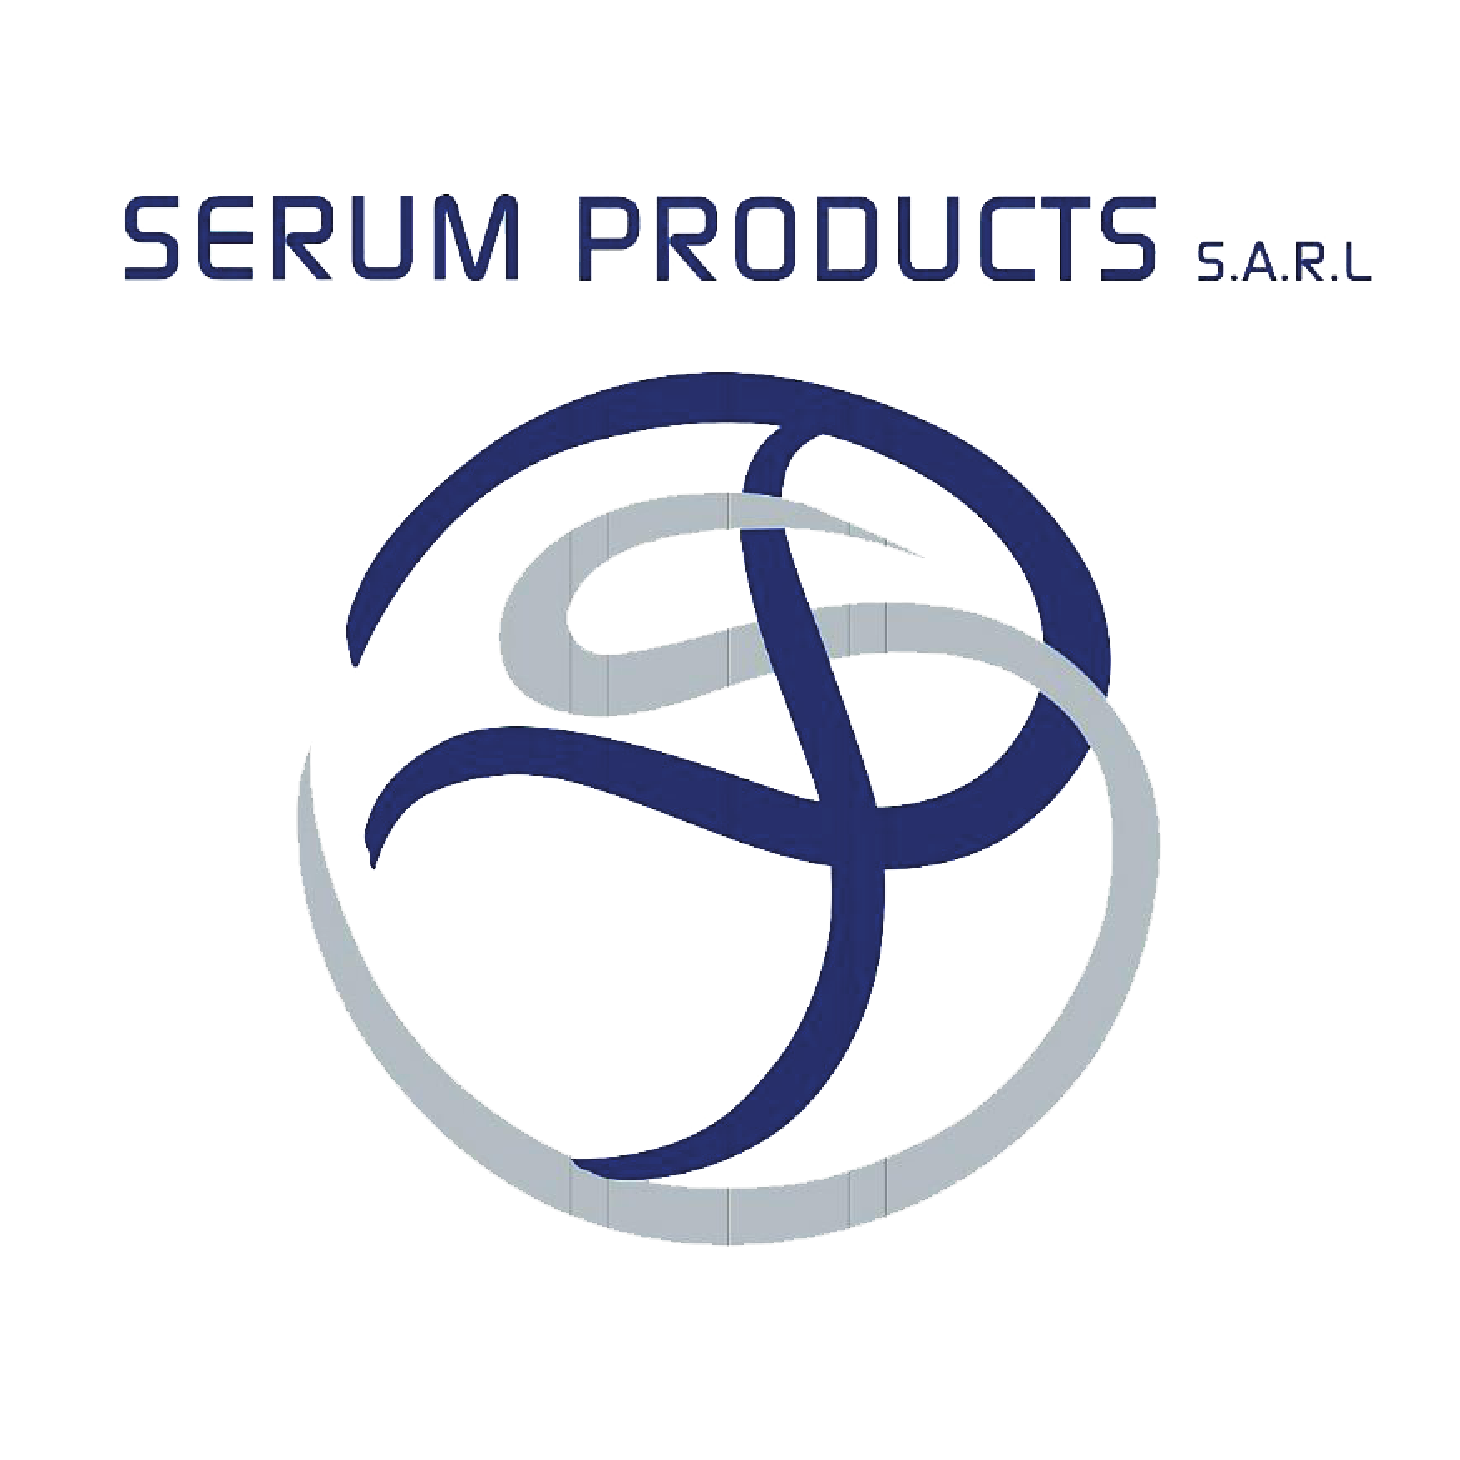 Serum Products S.A.R.L